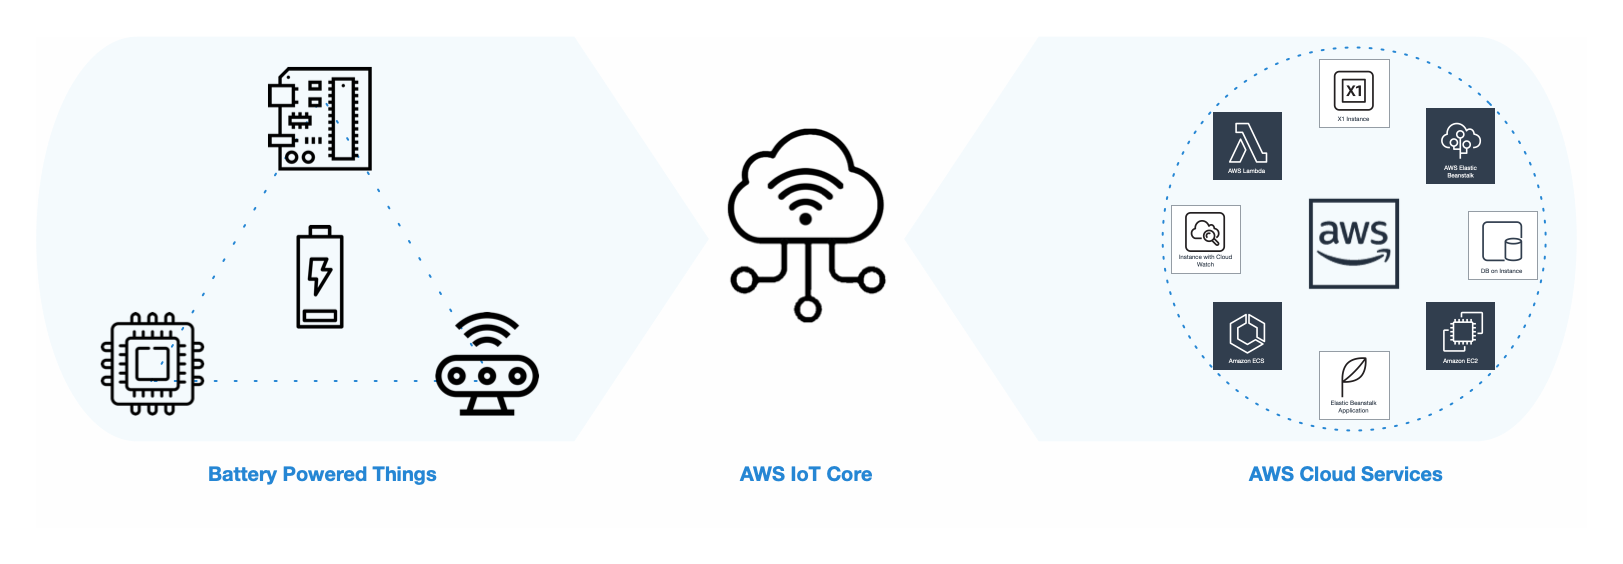 AWS IoT Overview